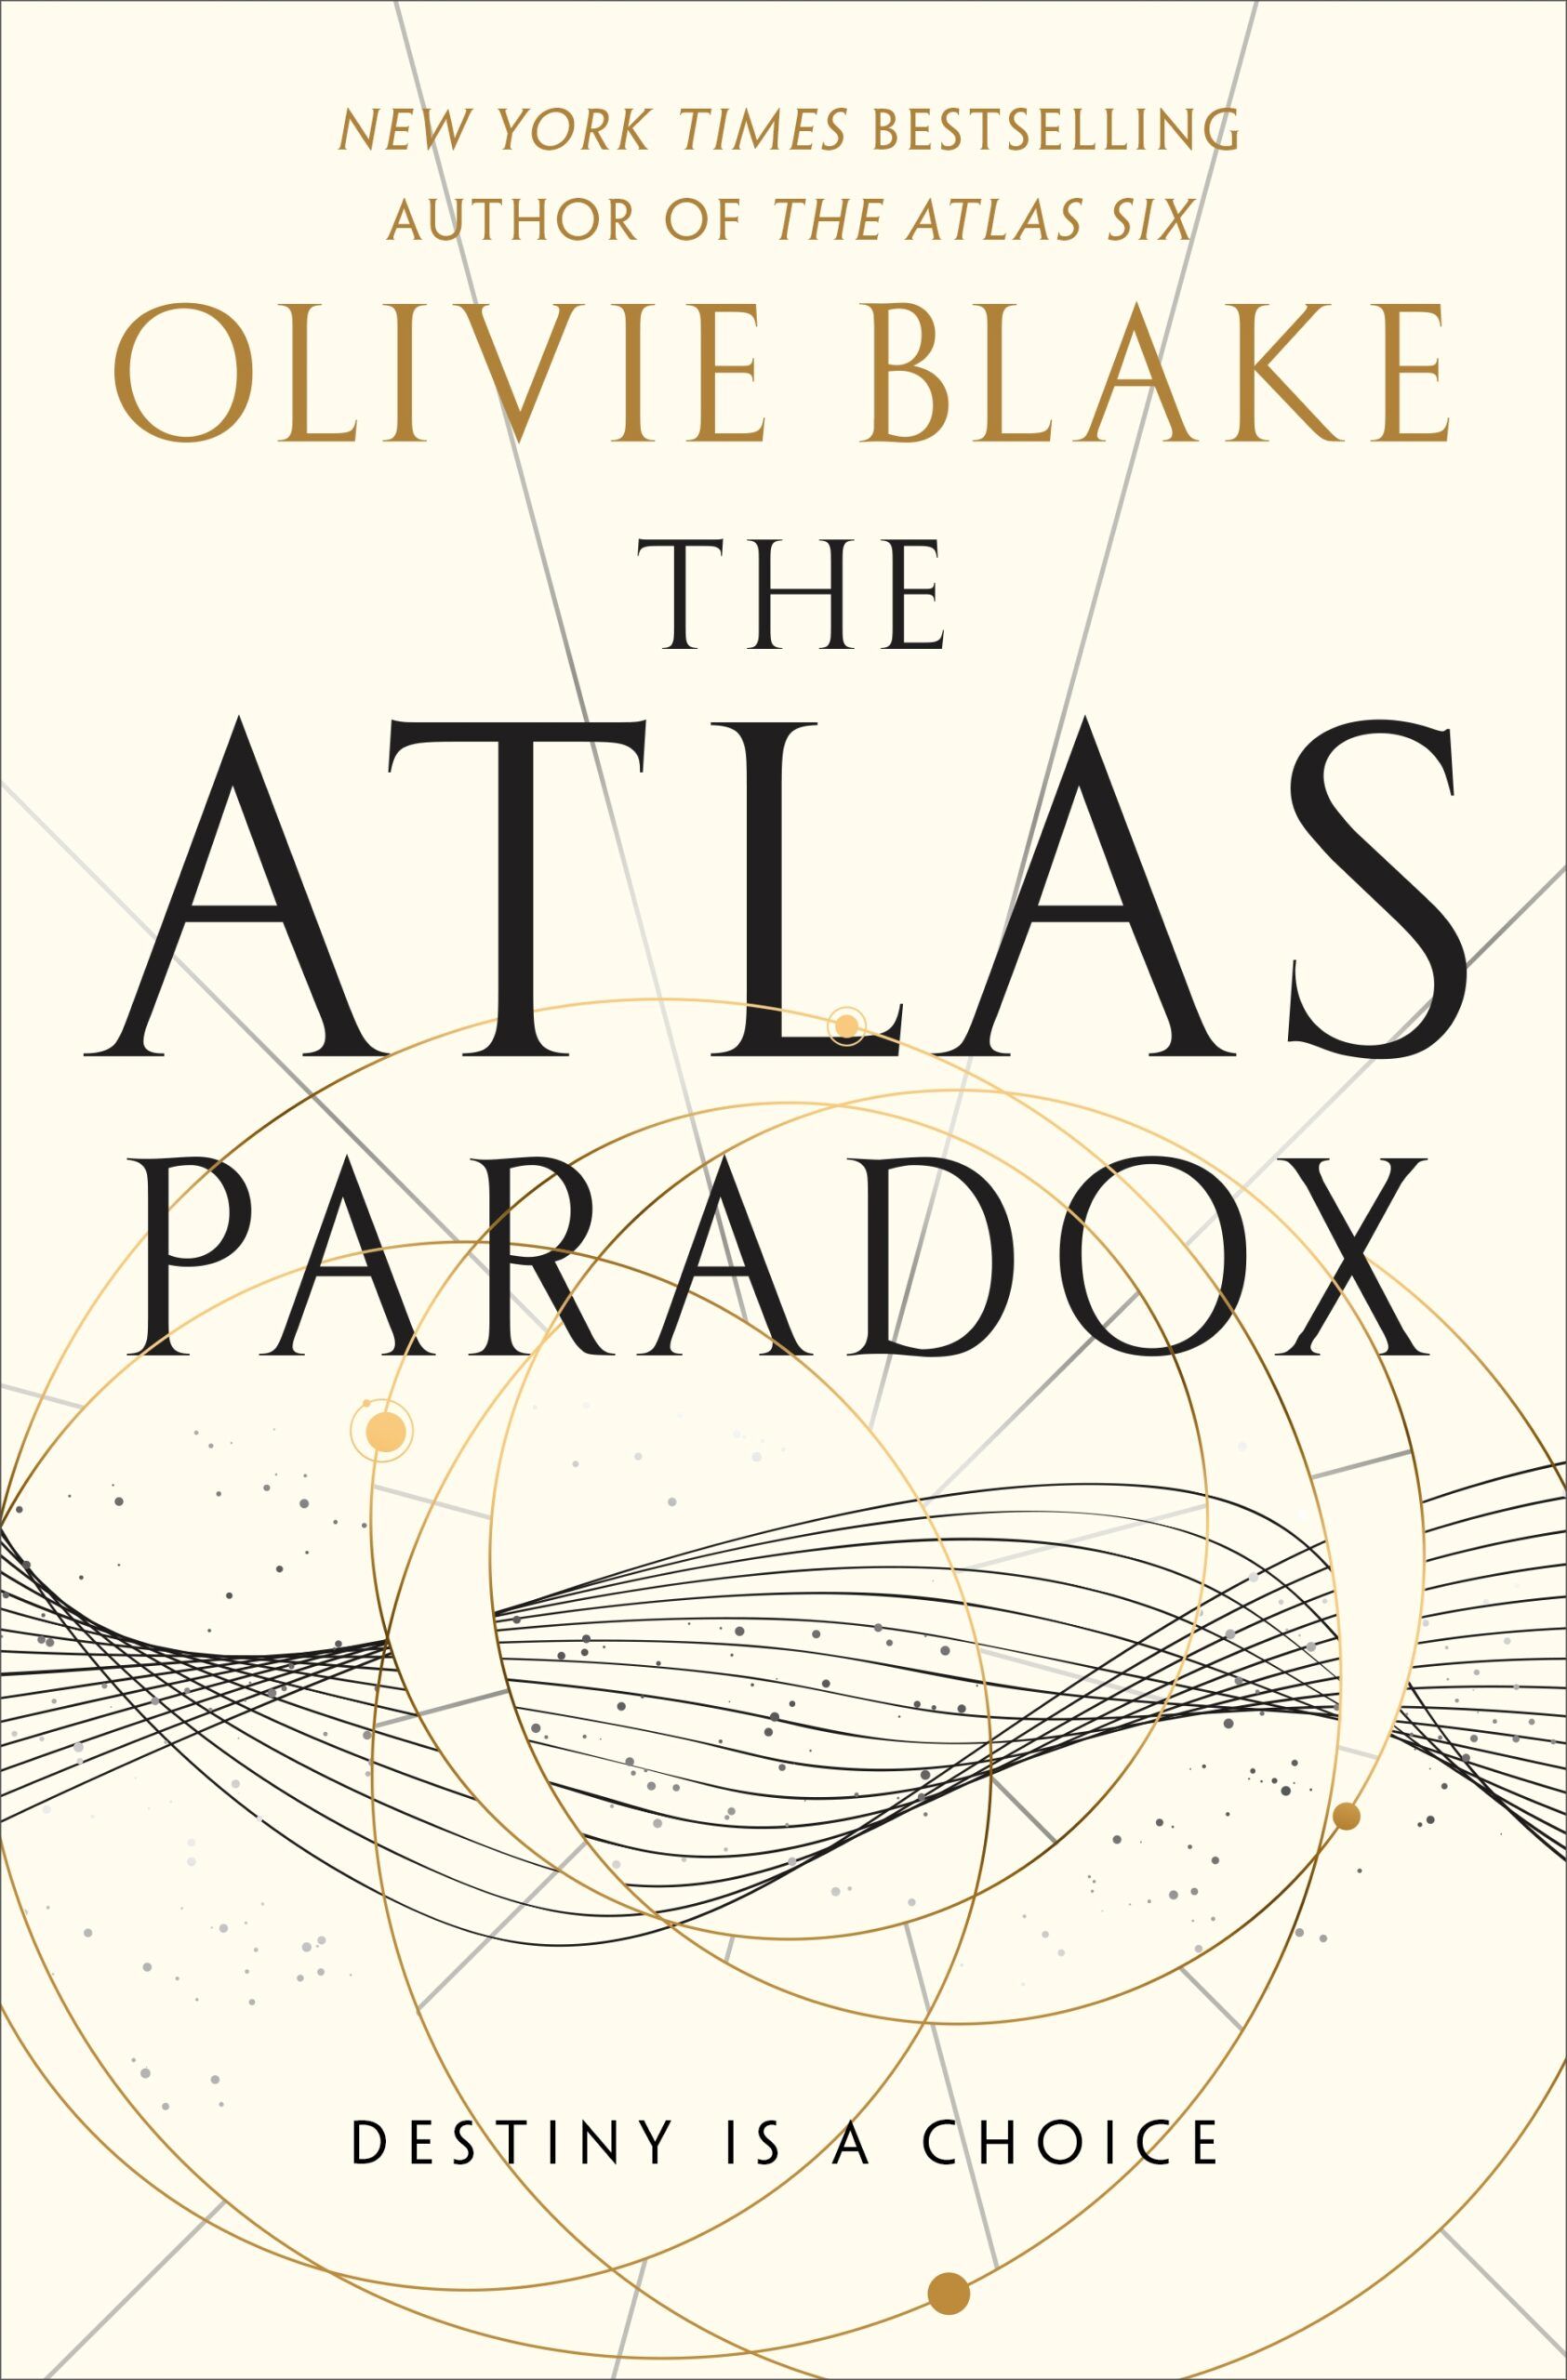 Book cover of The Atlas Paradox by Olivie Blake